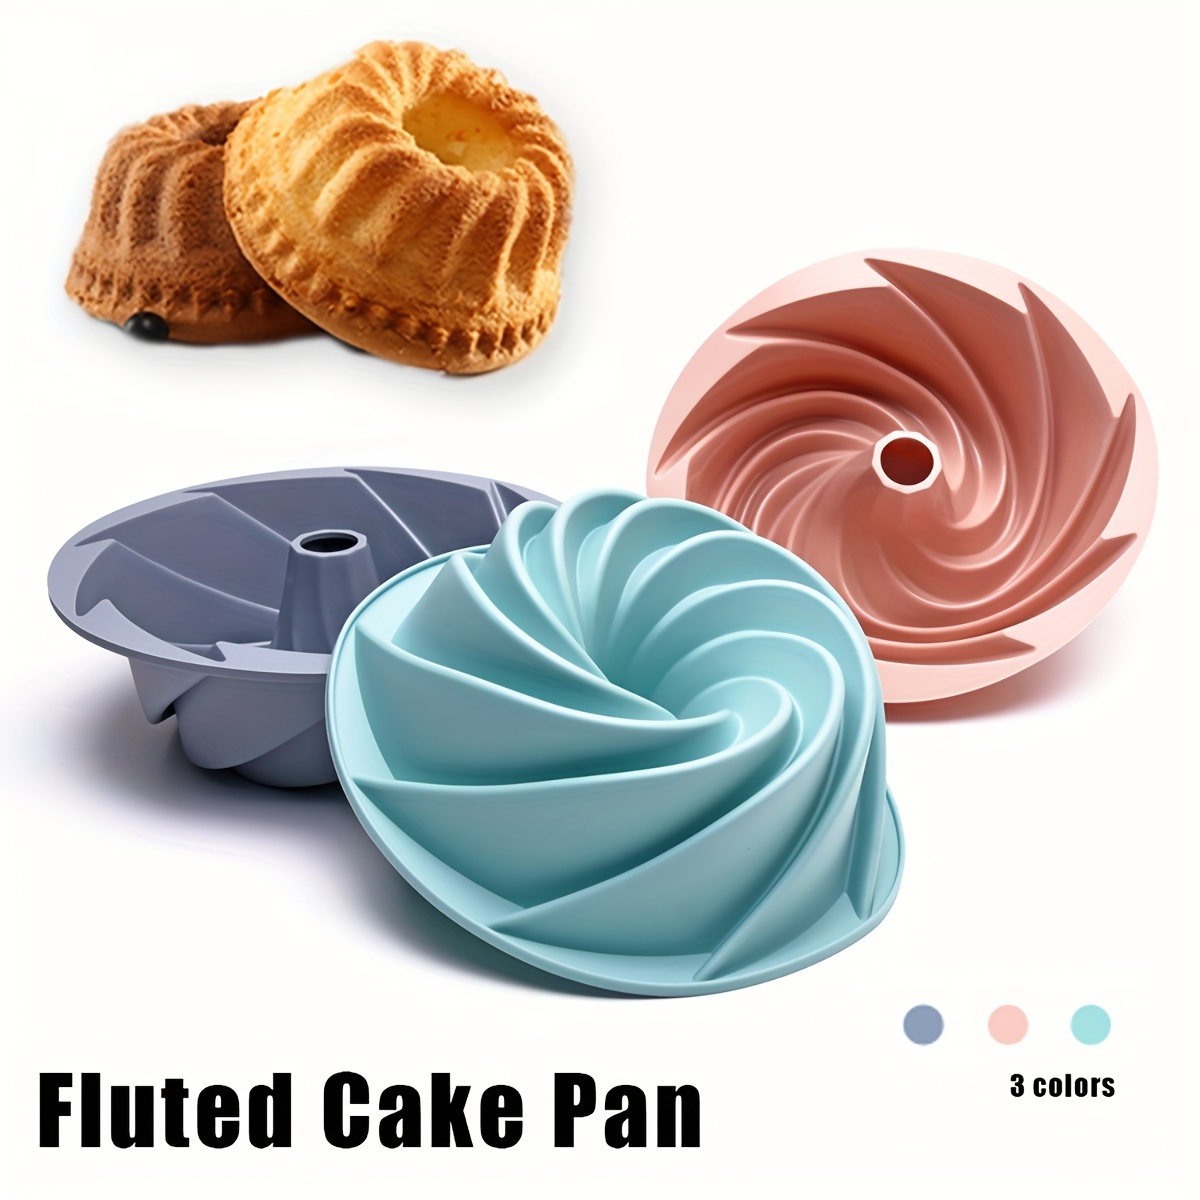 https://img.kwcdn.com/product/silicone-fluted-cake-pan/d69d2f15w98k18-36e307b7/temu-avi/image-crop/7fe5c8f2-efb5-440a-b201-65c3e54bfdd5.jpg